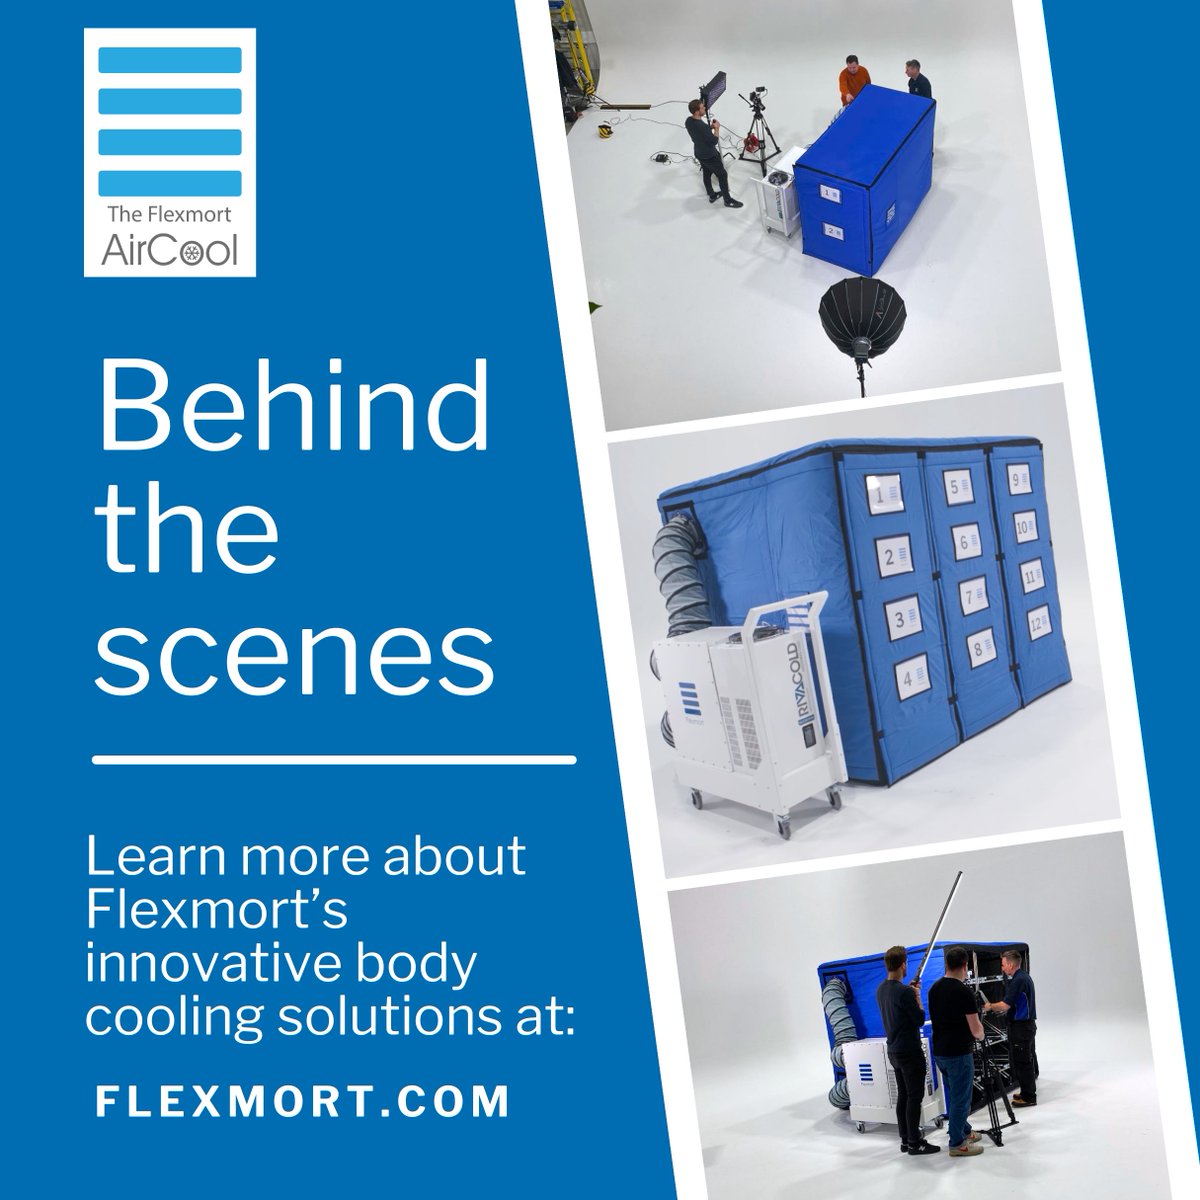 📣 Discover the Flexmort AirCool & Flexmort Bariatric AirCool – trusted by disaster teams, emergency services, hospitals, & leading funeral homes.
Need extra capacity? Looking for a mobile, quick-to-deploy body cooling solution? Visit: flexmort.com #DisasterResponse